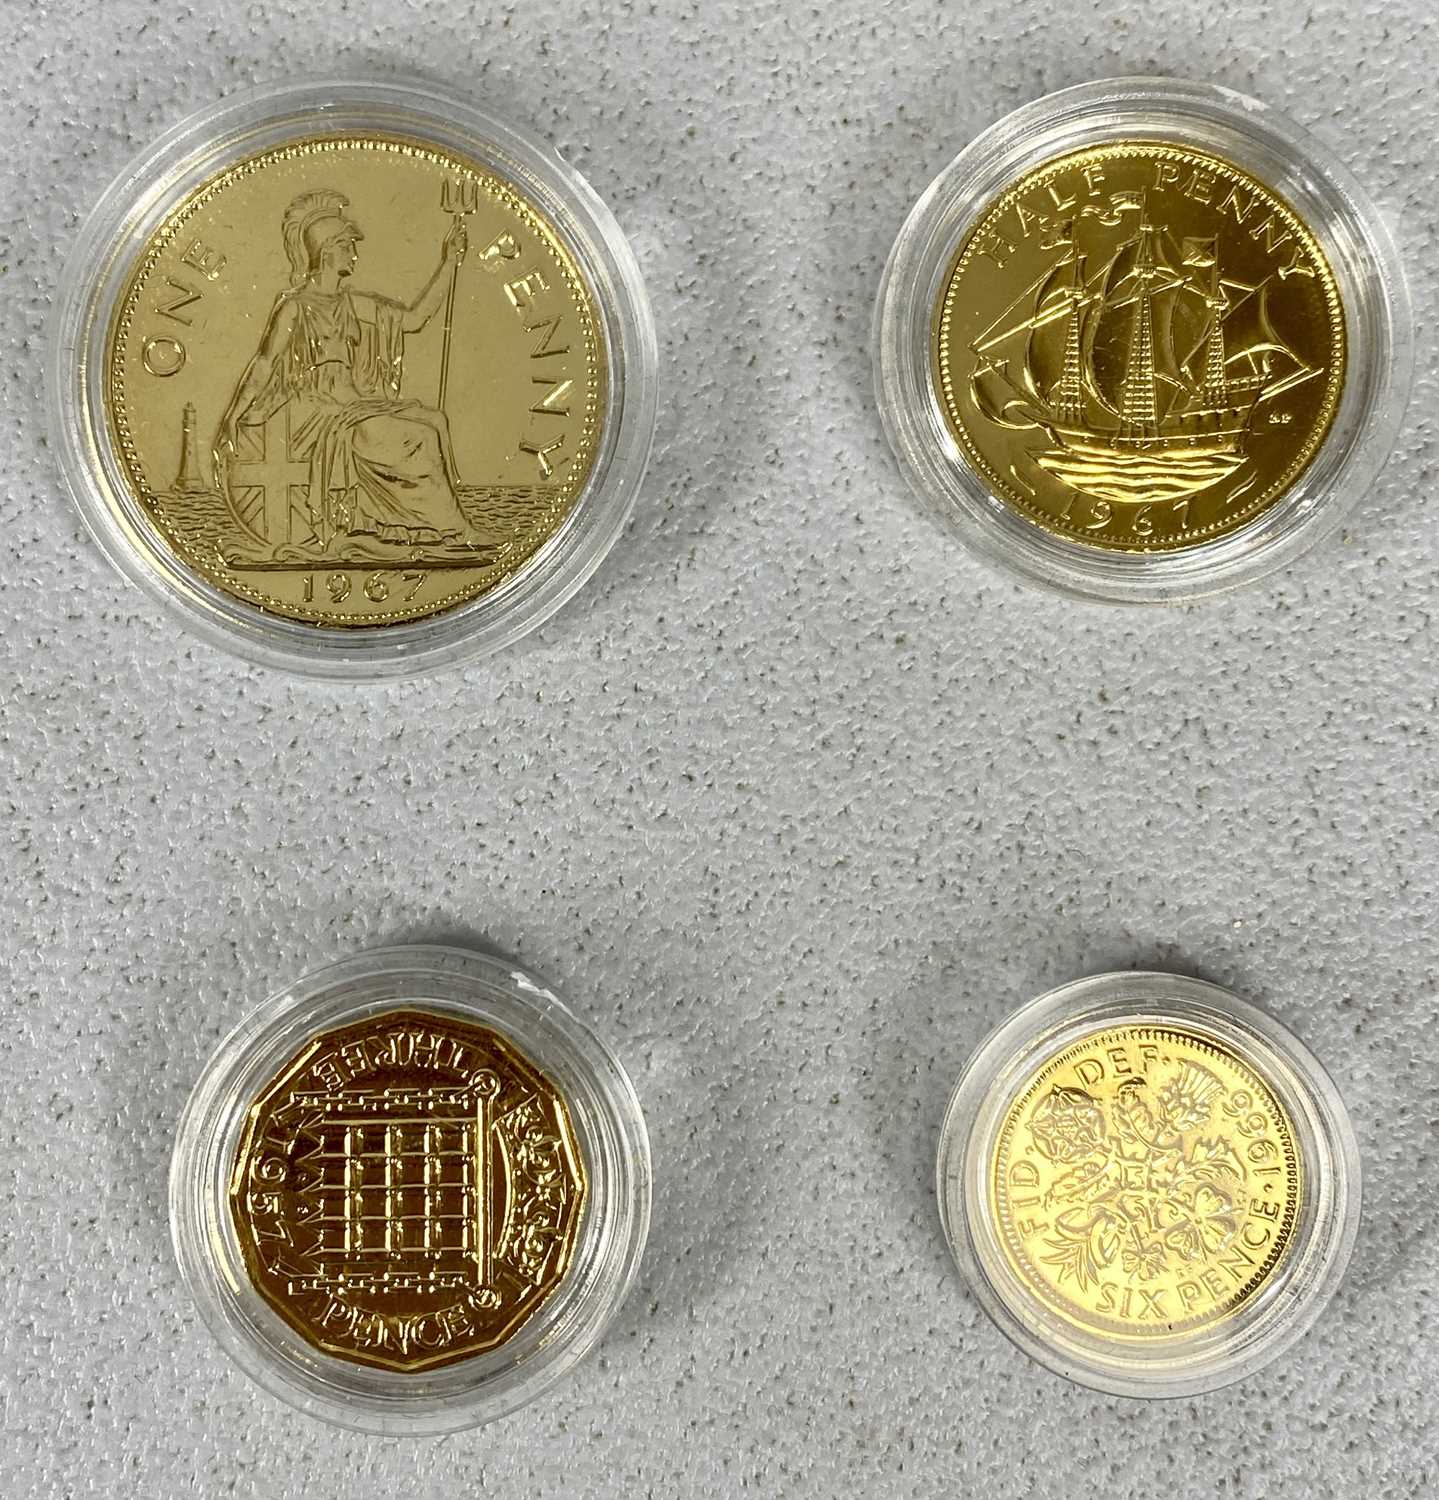 FOUR LONDON MINT GOLD PLATED £5 COINS, other British gold plated coins, commemorative crowns etc, - Image 2 of 6